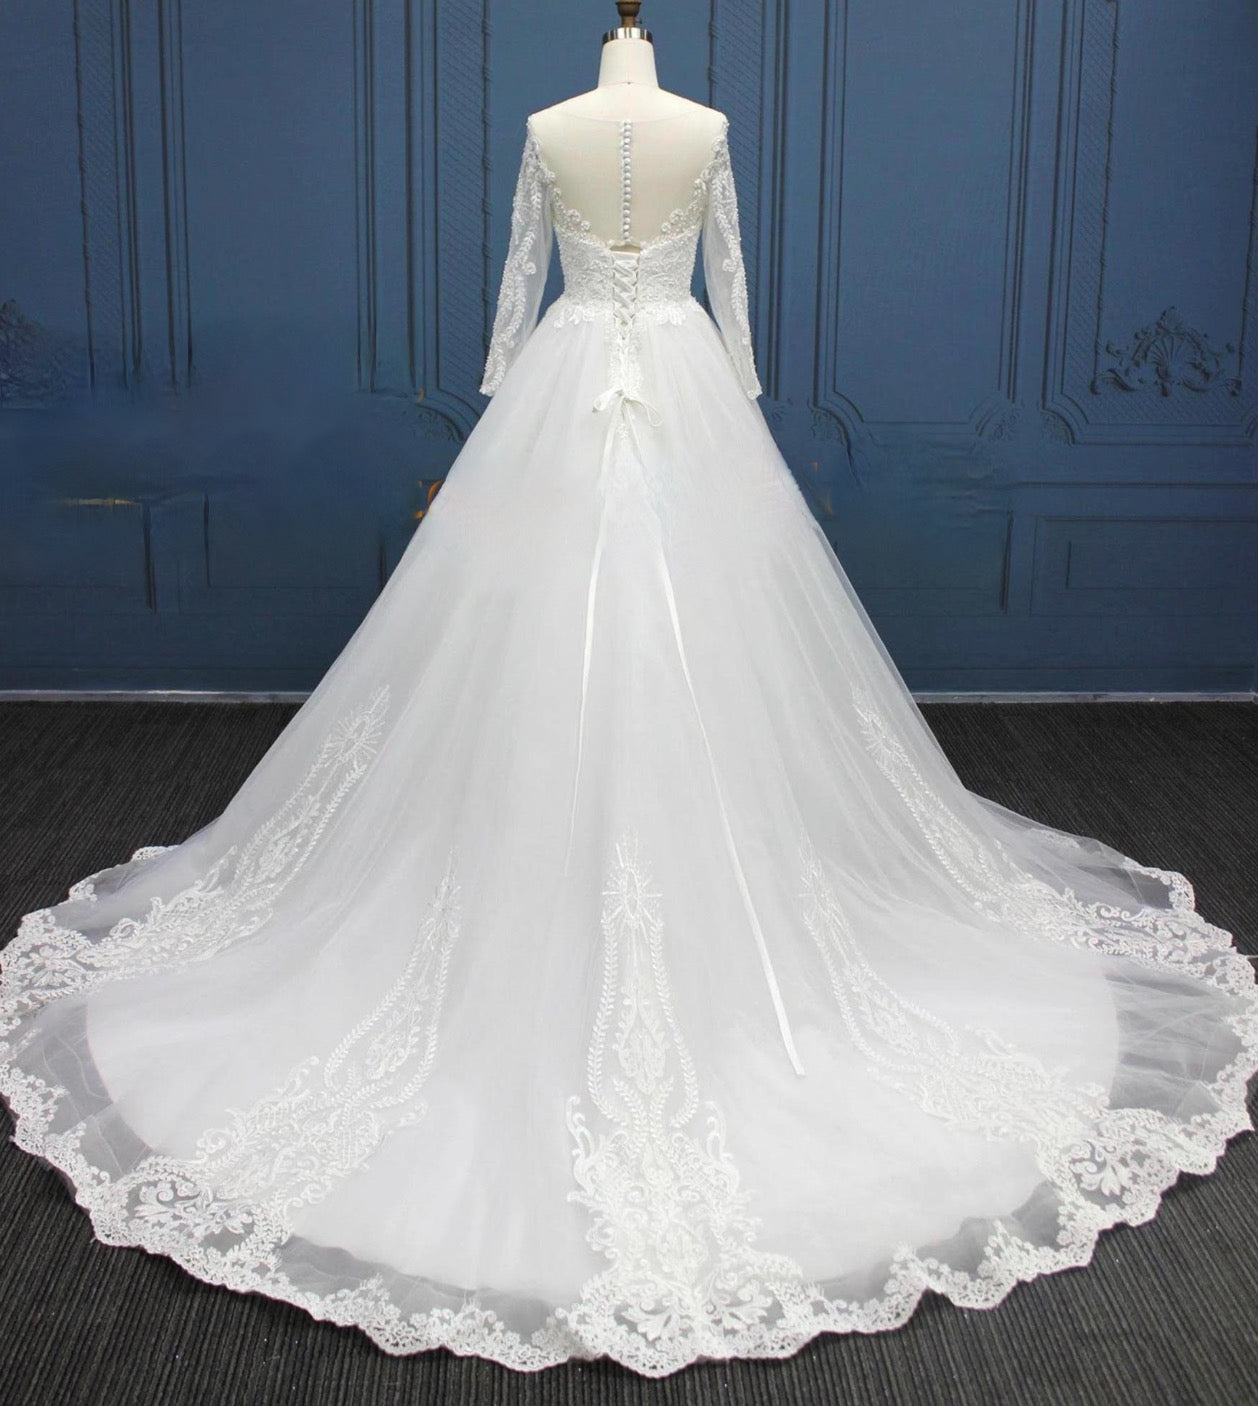 Tailoring uses Stich Stiff Polyester CANCAN Net Horsehair Braid for  Polyester Boning Sewing Wedding Dress Dance